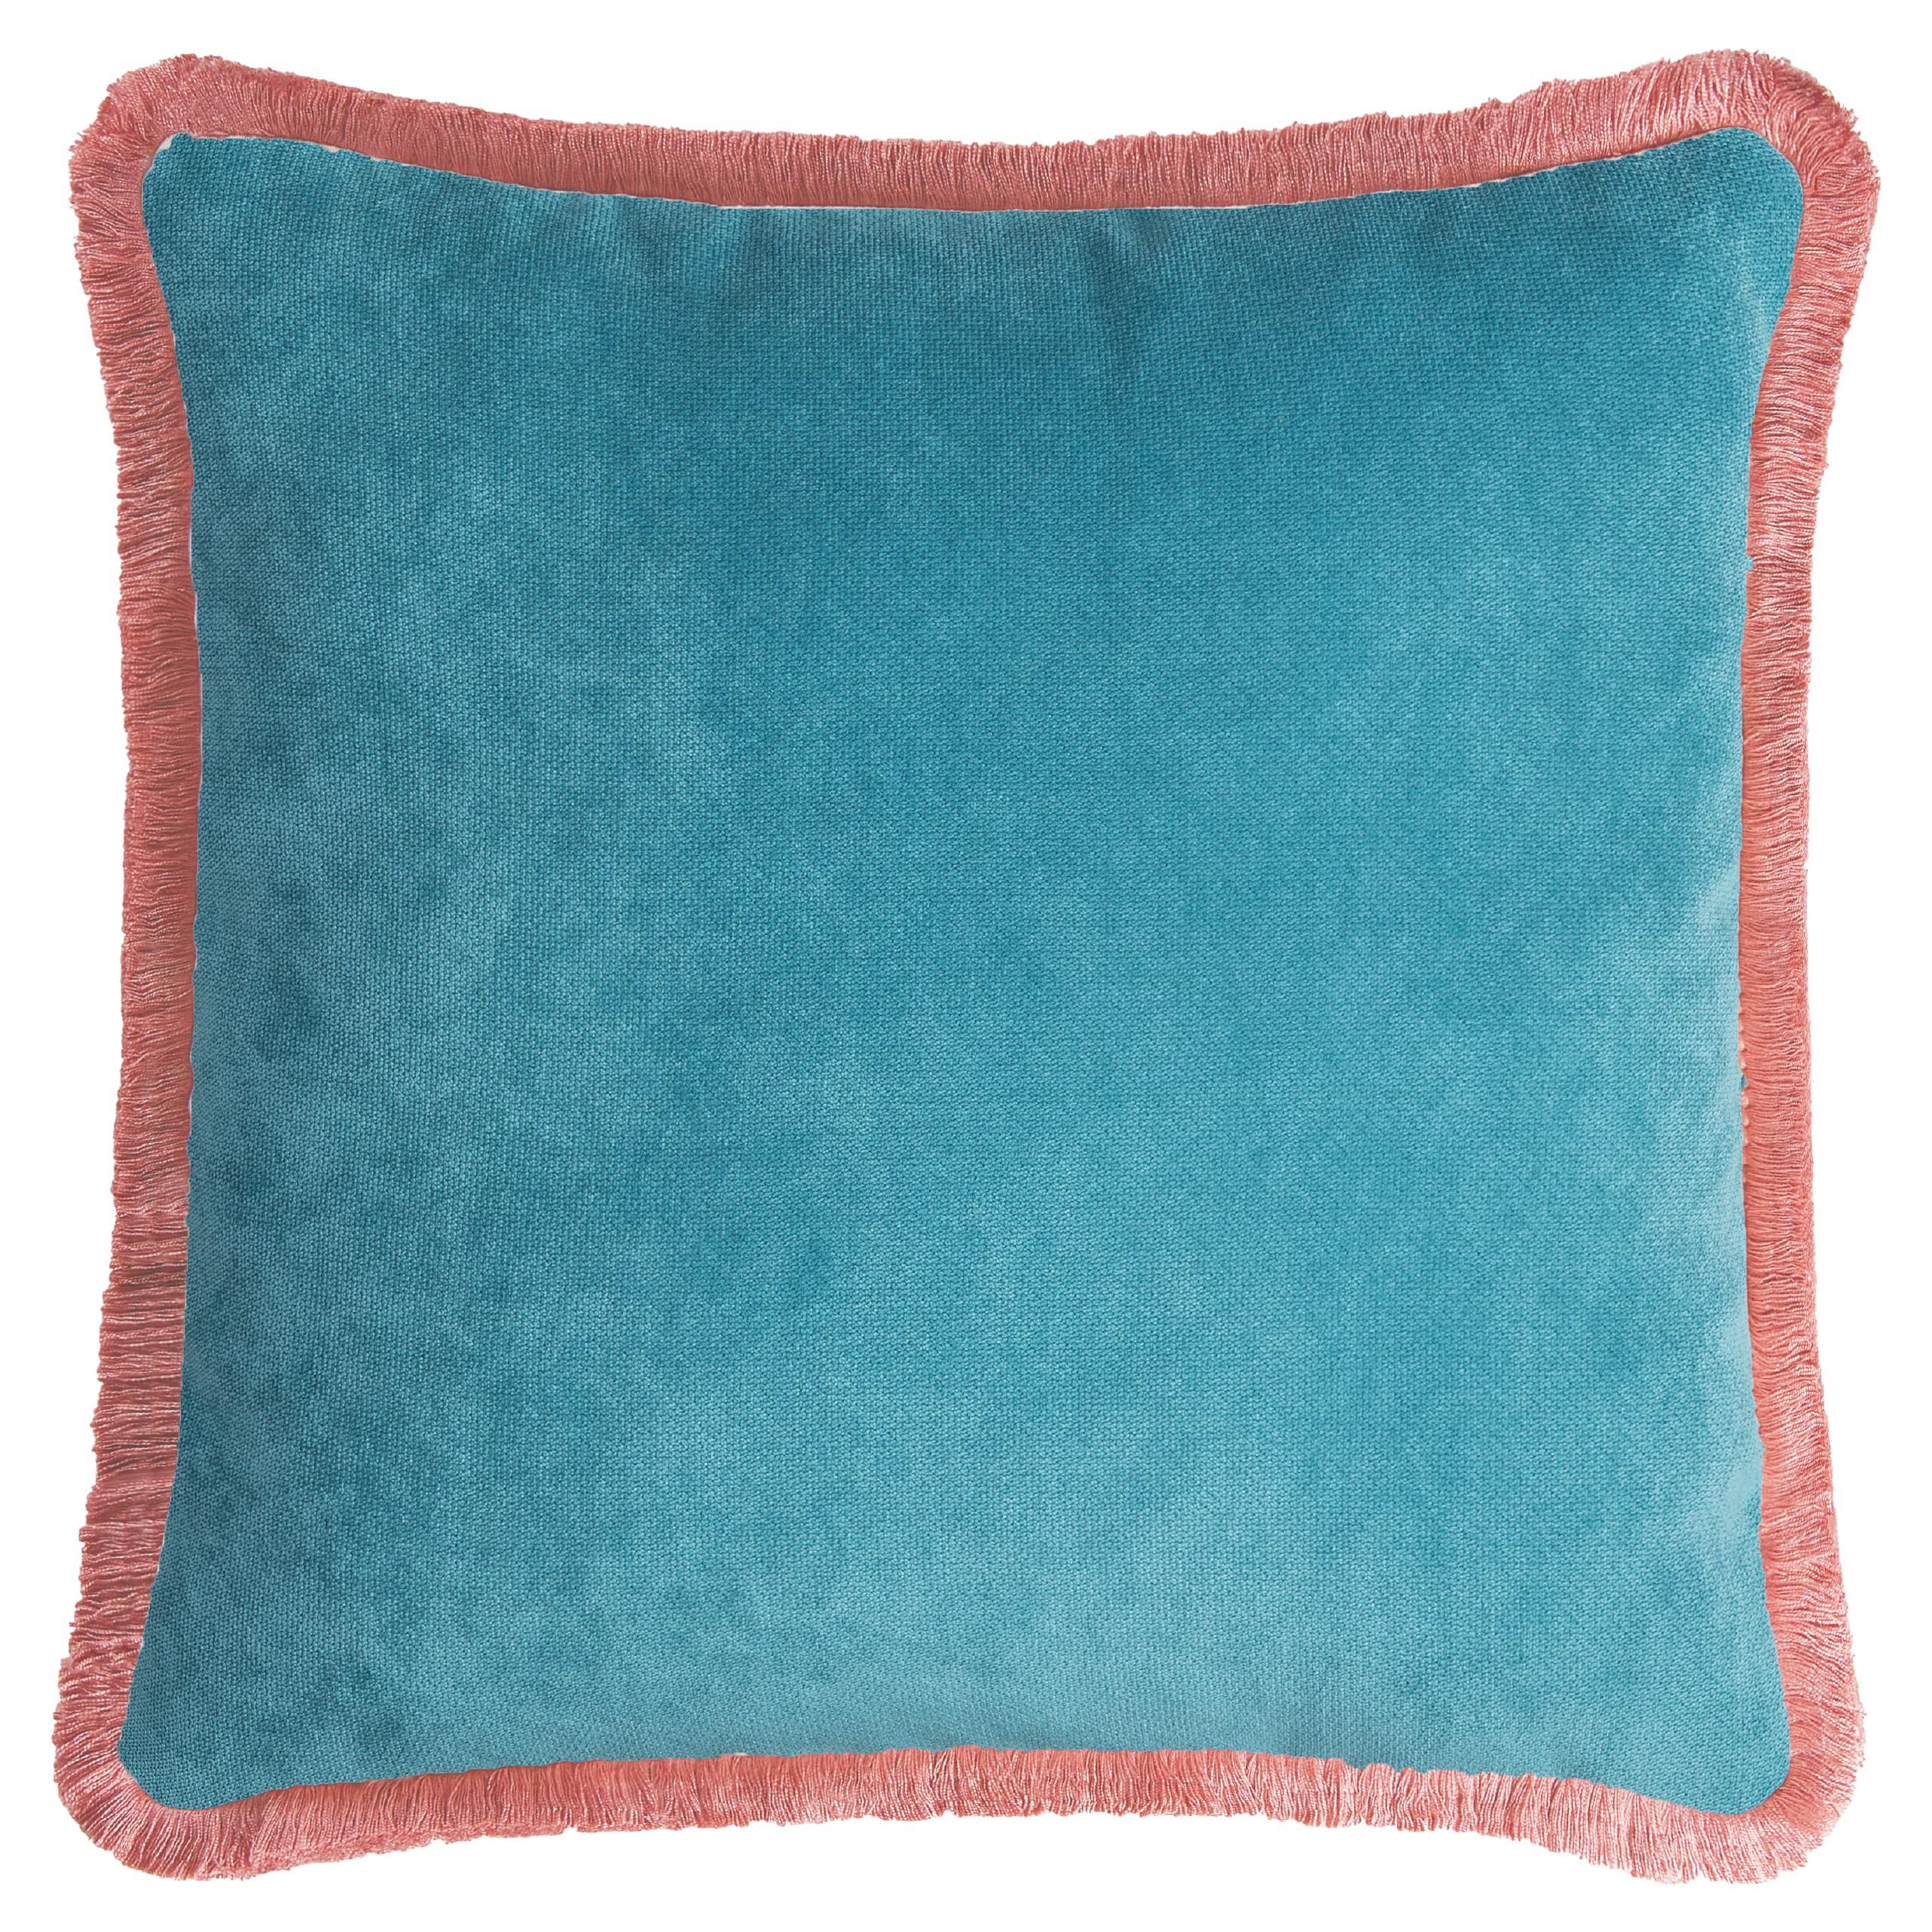 HAPPY PILLOW 40 Velvet Turquoise  with Pink Fringes For Sale